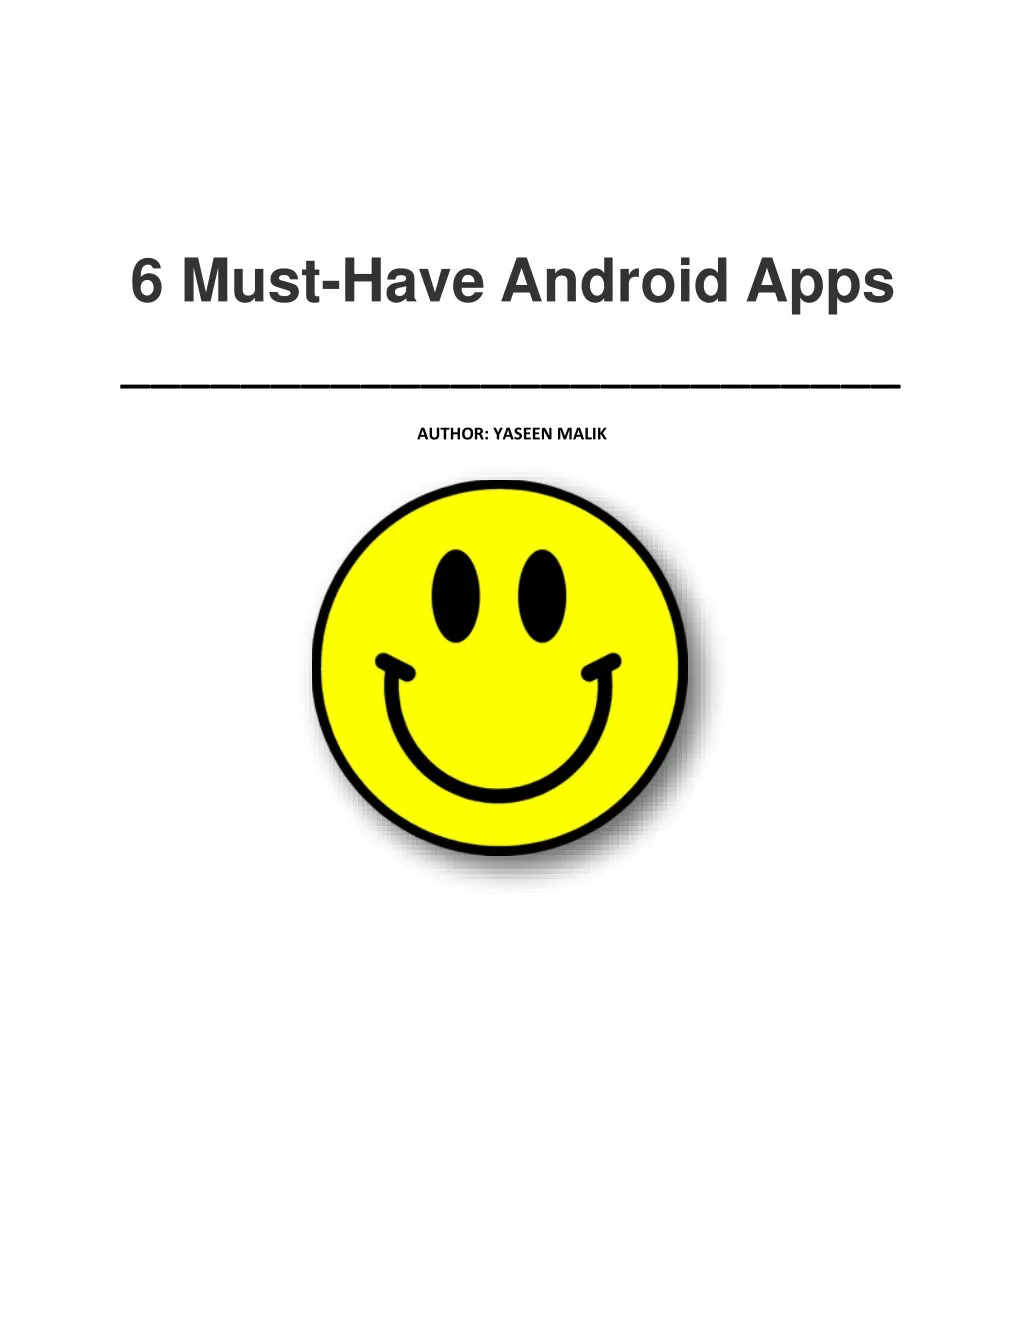 6 must have android apps